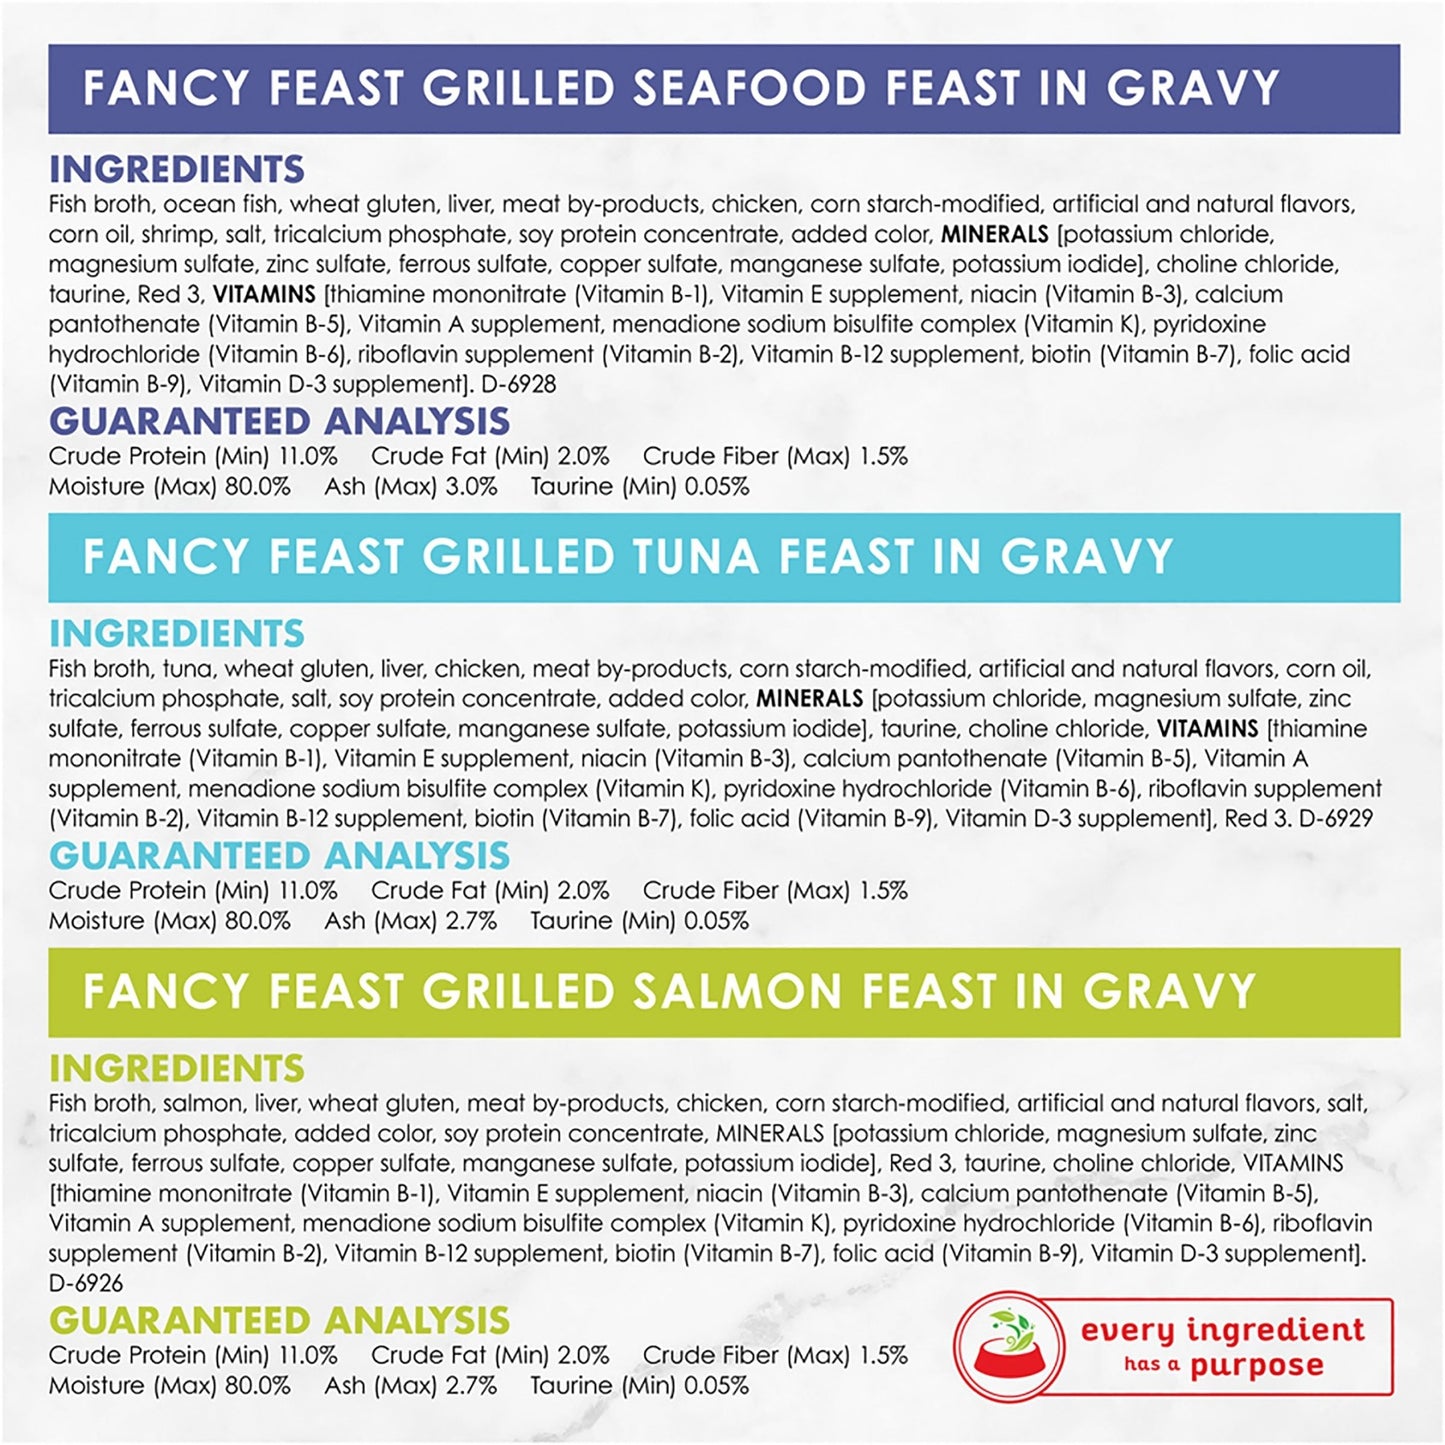 Fancy Feast Grilled Seafood Variety 24x85g - Woonona Petfood & Produce